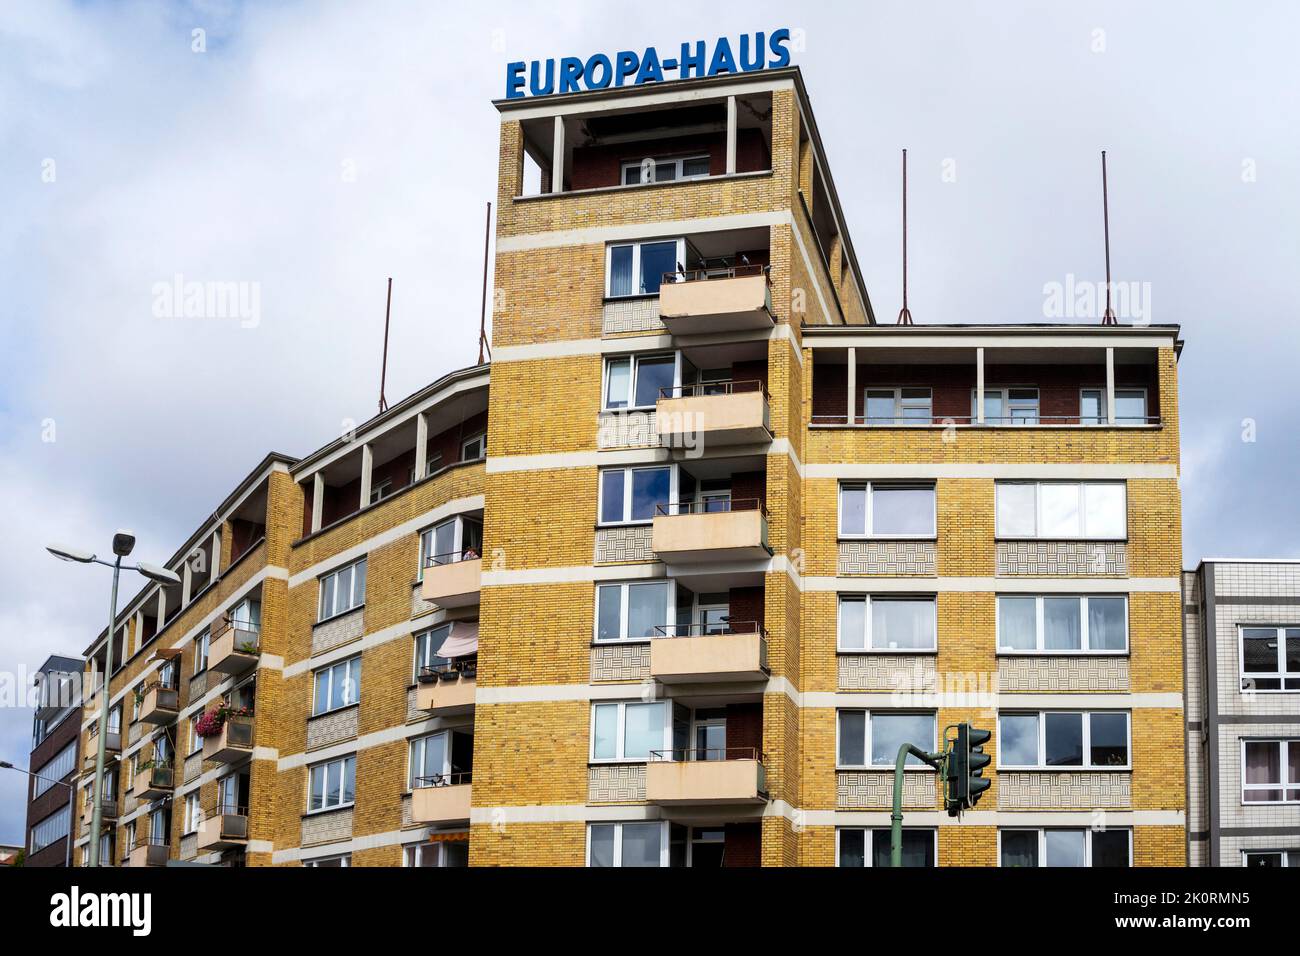 Europa-Haus in Kaiserslautern. Built in 1959, it is a lighthosue project of post-war architecture. Stock Photo